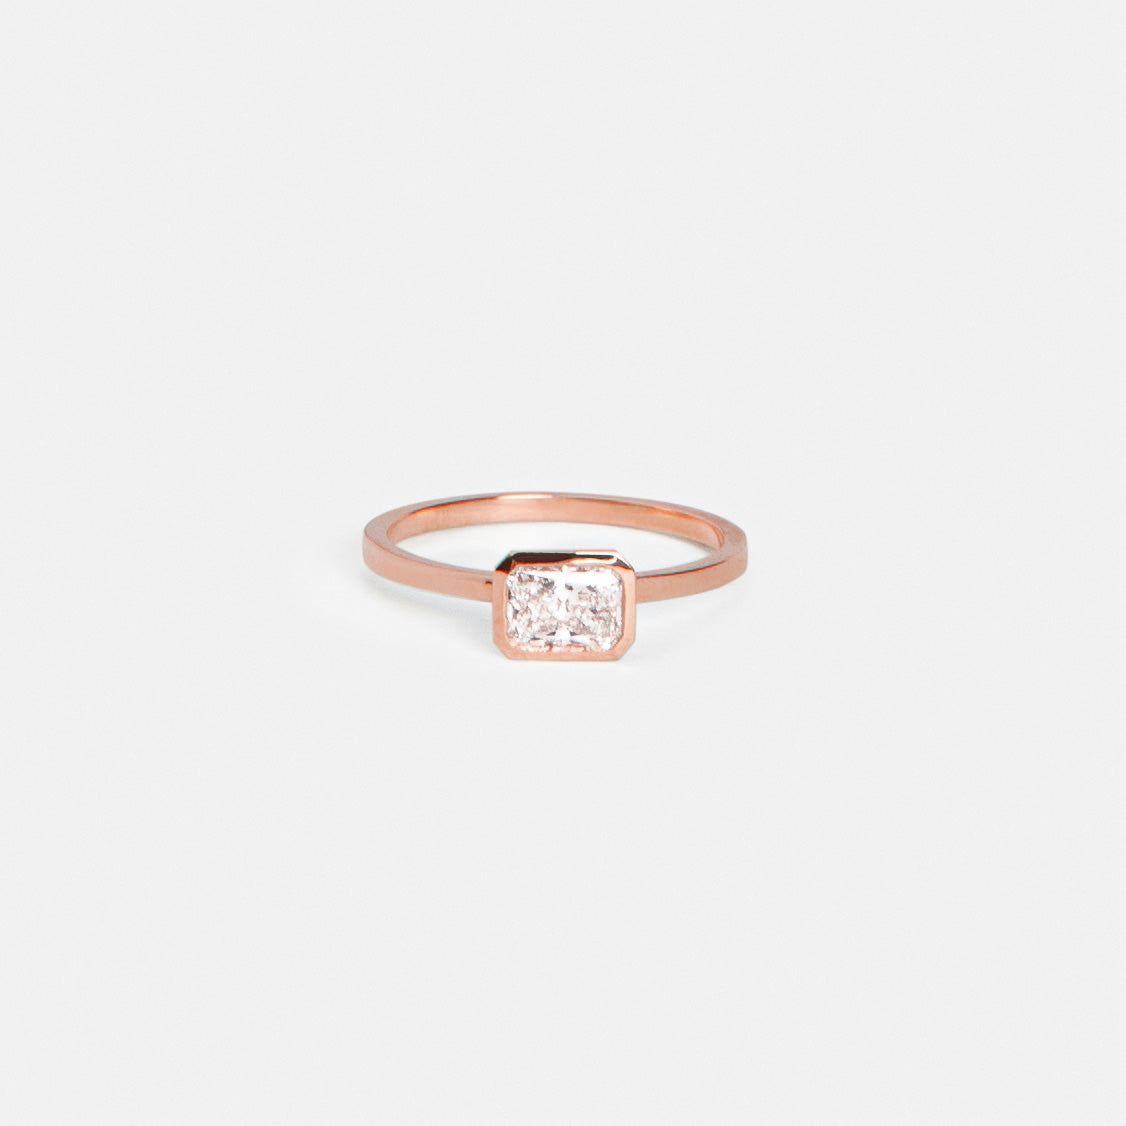 Mudu Simple Ring in 14k Rose Gold set with a 0.6ct radiant cut lab-grown diamond By SHW Fine Jewelry NYC